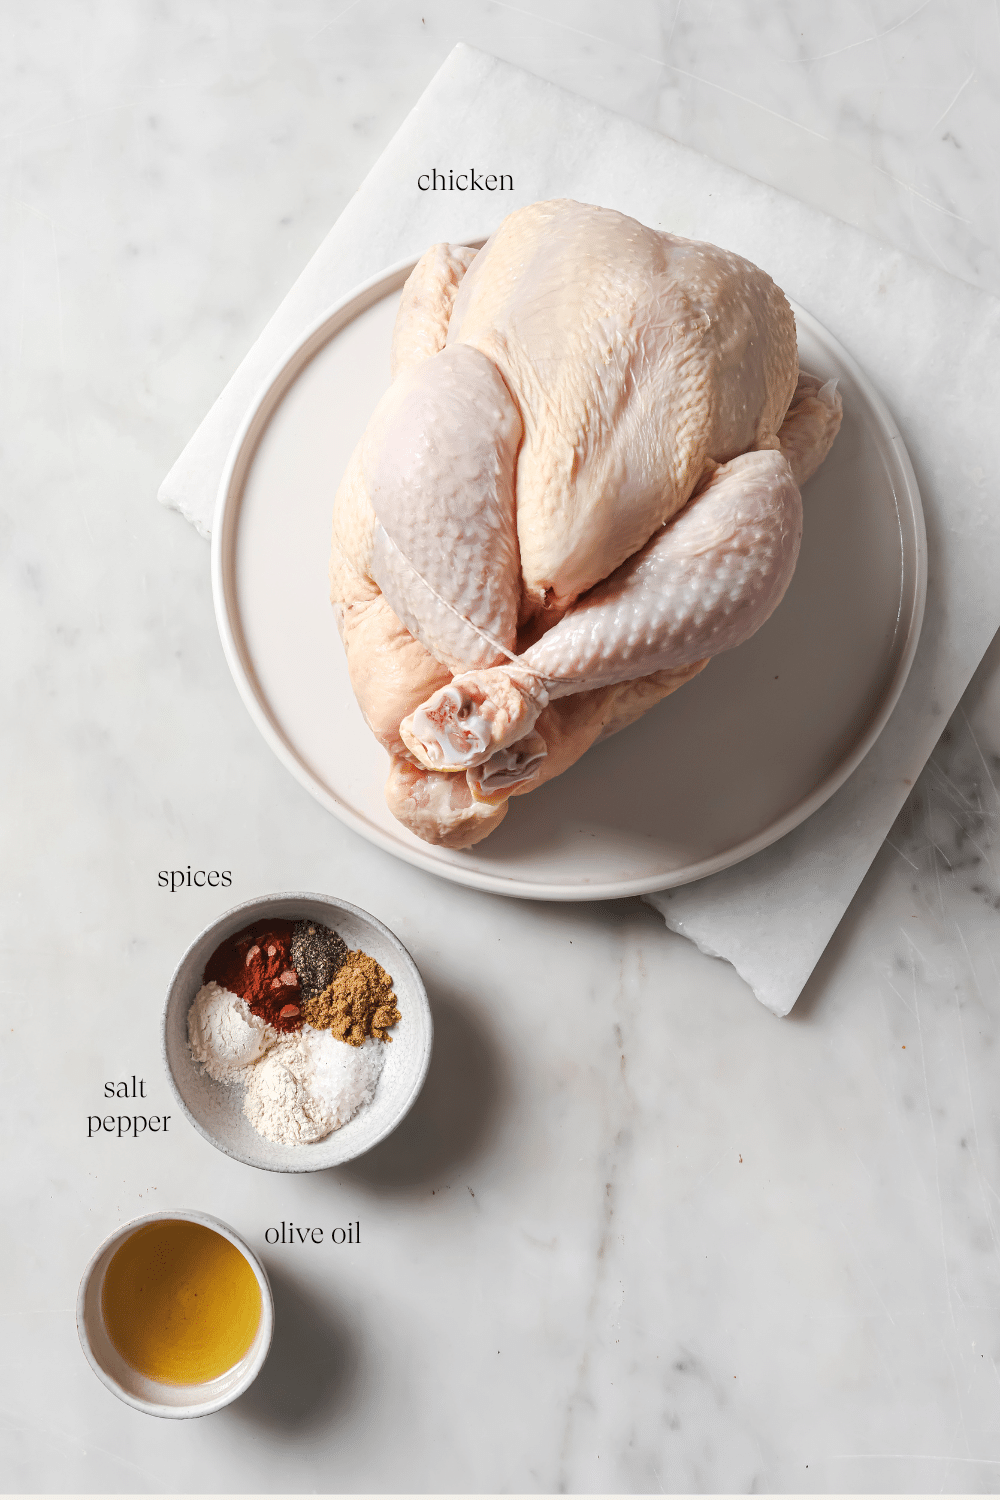 Pre-measured ingredients to season the chicken.